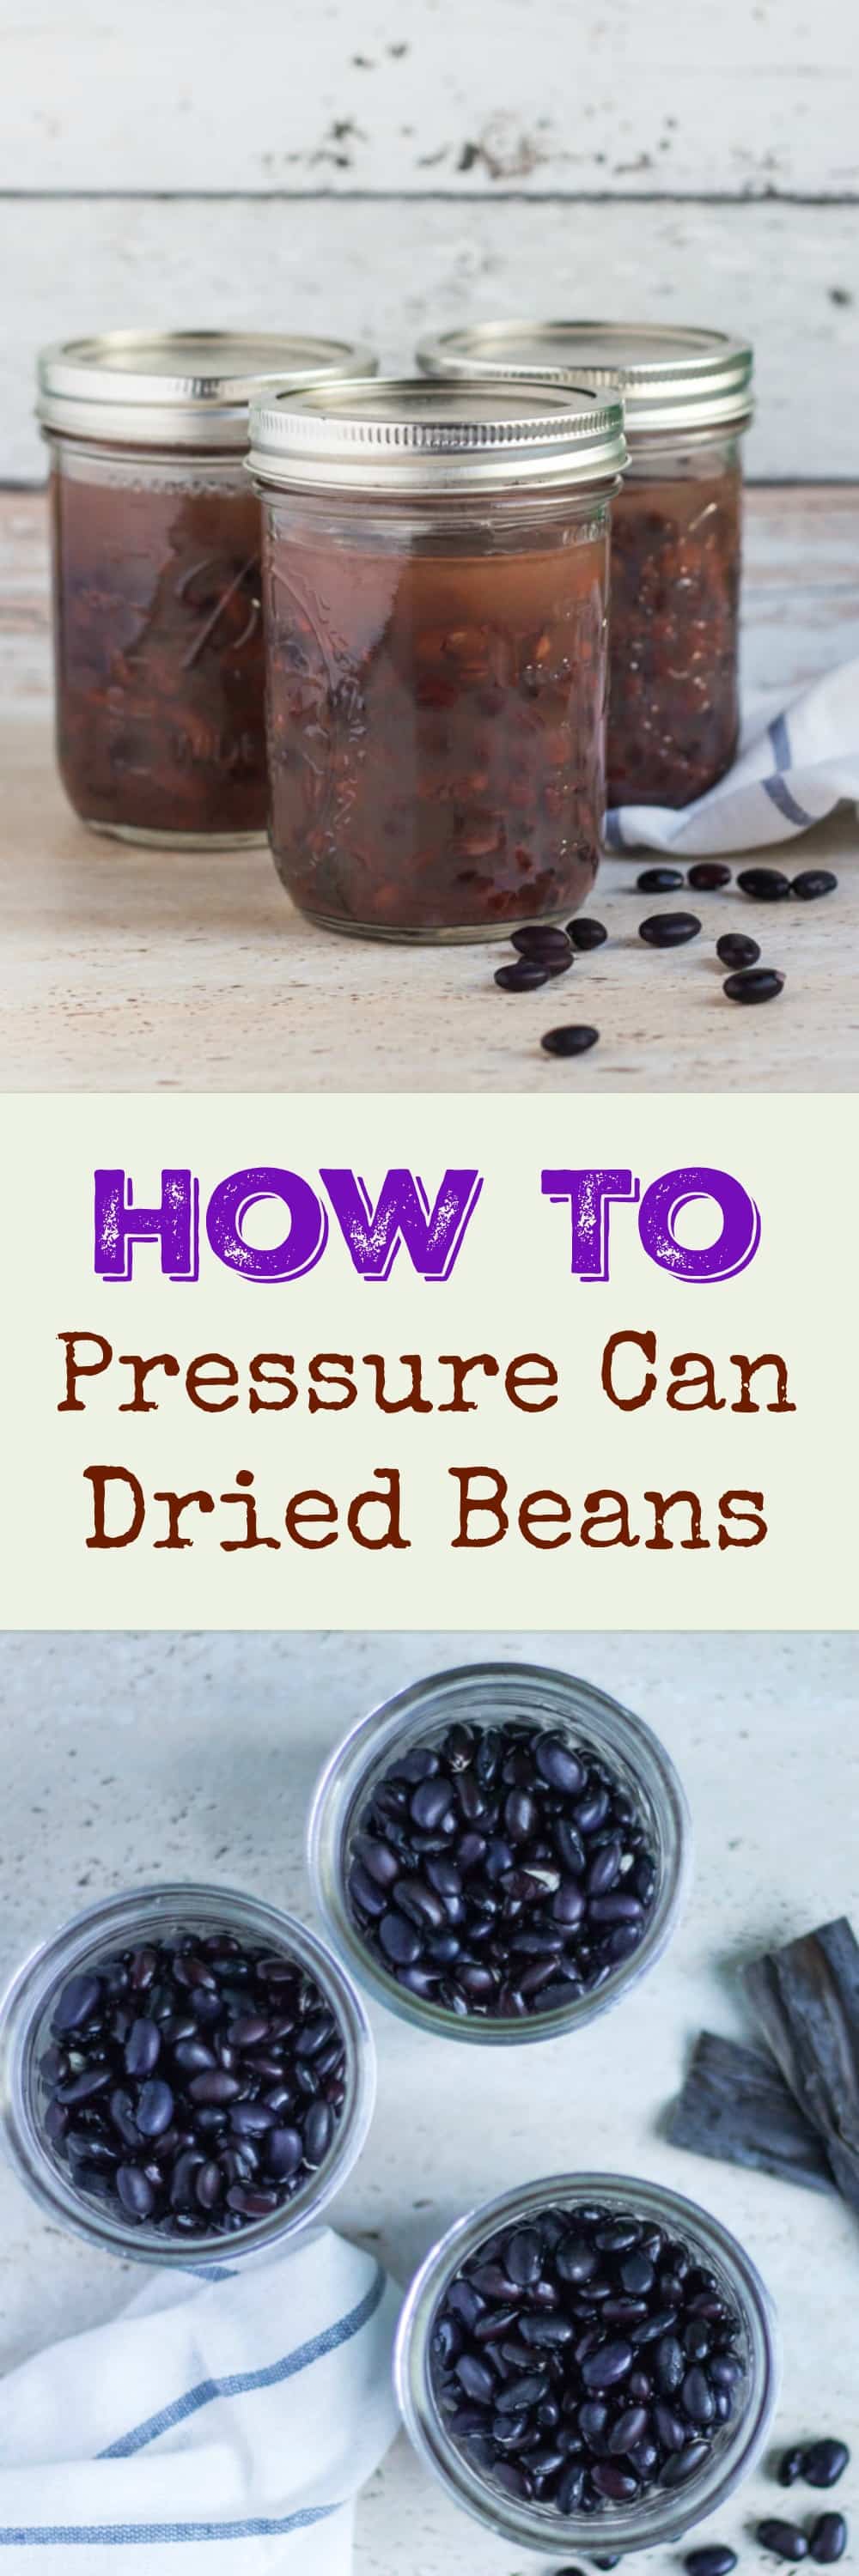 How to Pressure Can Dried Beans. Cheaper than storebought, and incredibly satisfying.